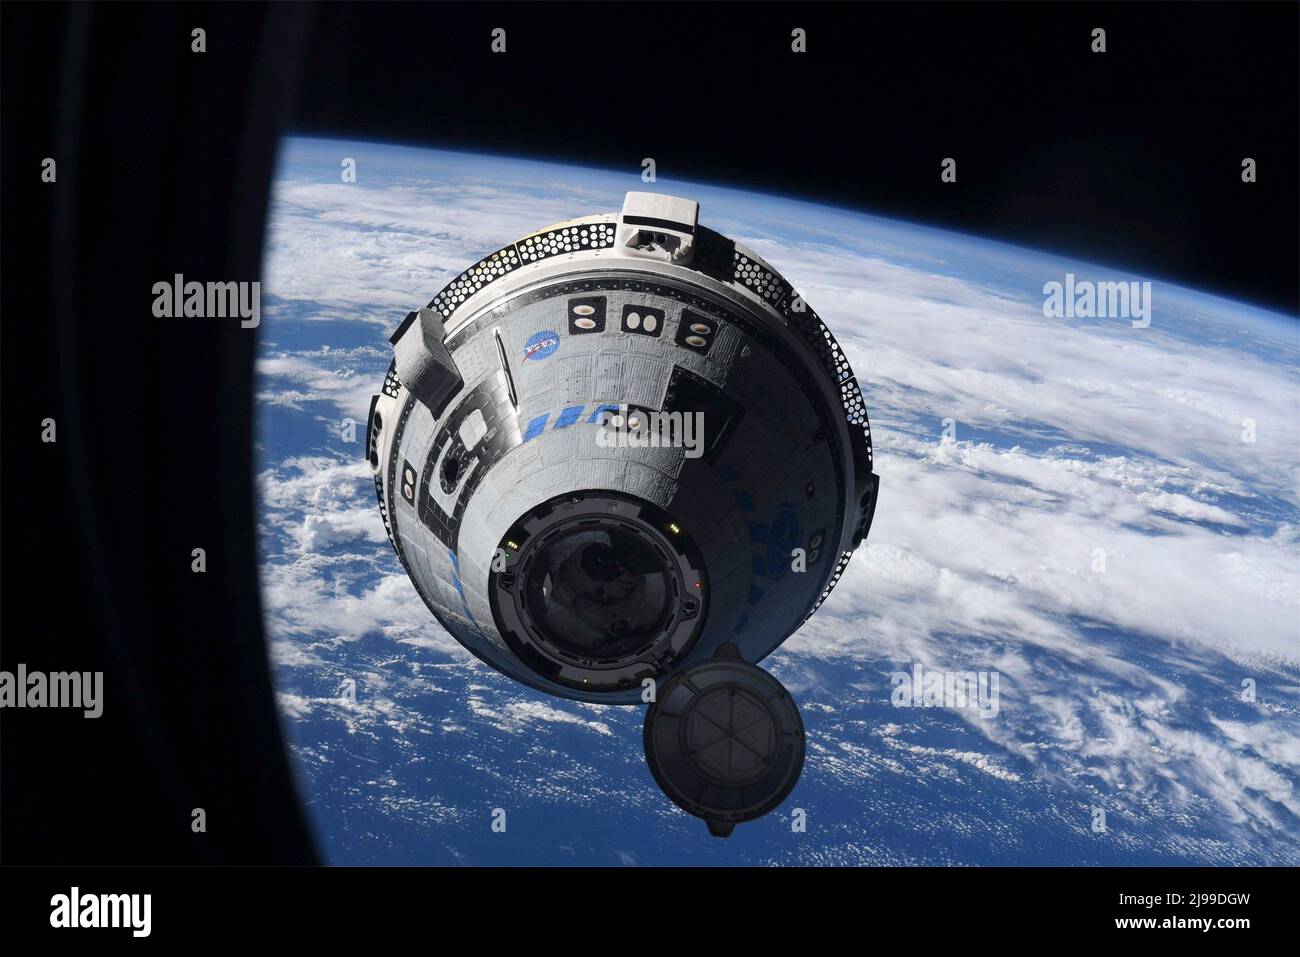 International Space Station, Earth Orbit. 21st May, 2022. International Space Station, Earth Orbit. 21 May, 2022. The Boeing CST-100 Starliner spacecraft approaches to dock for the first time with the International Space Station, May 21, 2022 in Earth Orbit. Credit: ESA/NASA/Alamy Live News Stock Photo